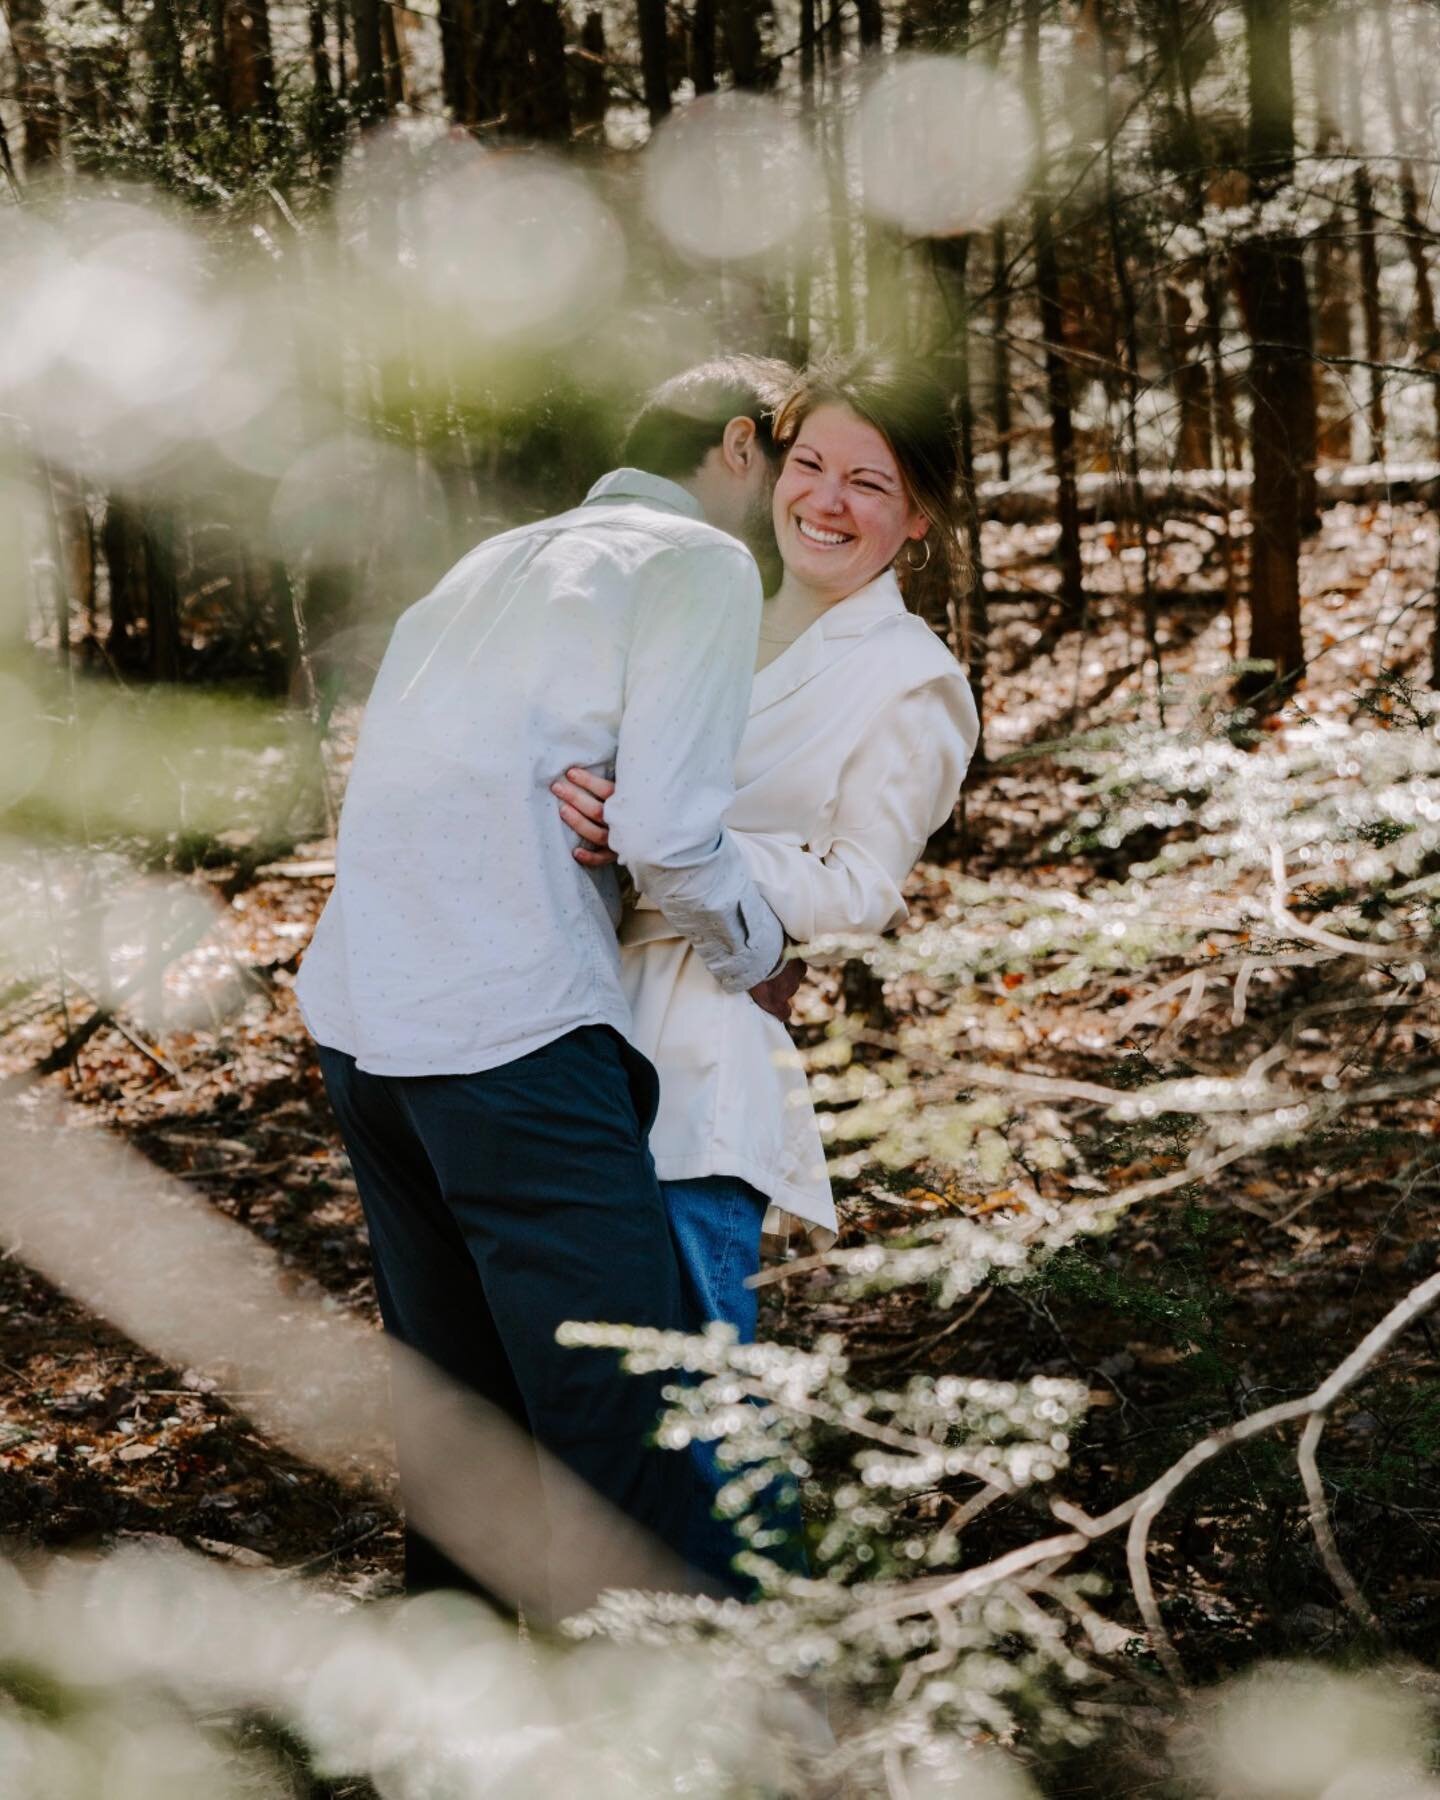 And this is why it is impossible to hate on any season in New England. There&rsquo;s so much beauty. All you have to do is open your eyes. An amazing engagement session with L&amp;C on Saturday! ⁣
.⁣
.⁣
.⁣
.⁣
.⁣
#adventureelopement #bostonweddingphot